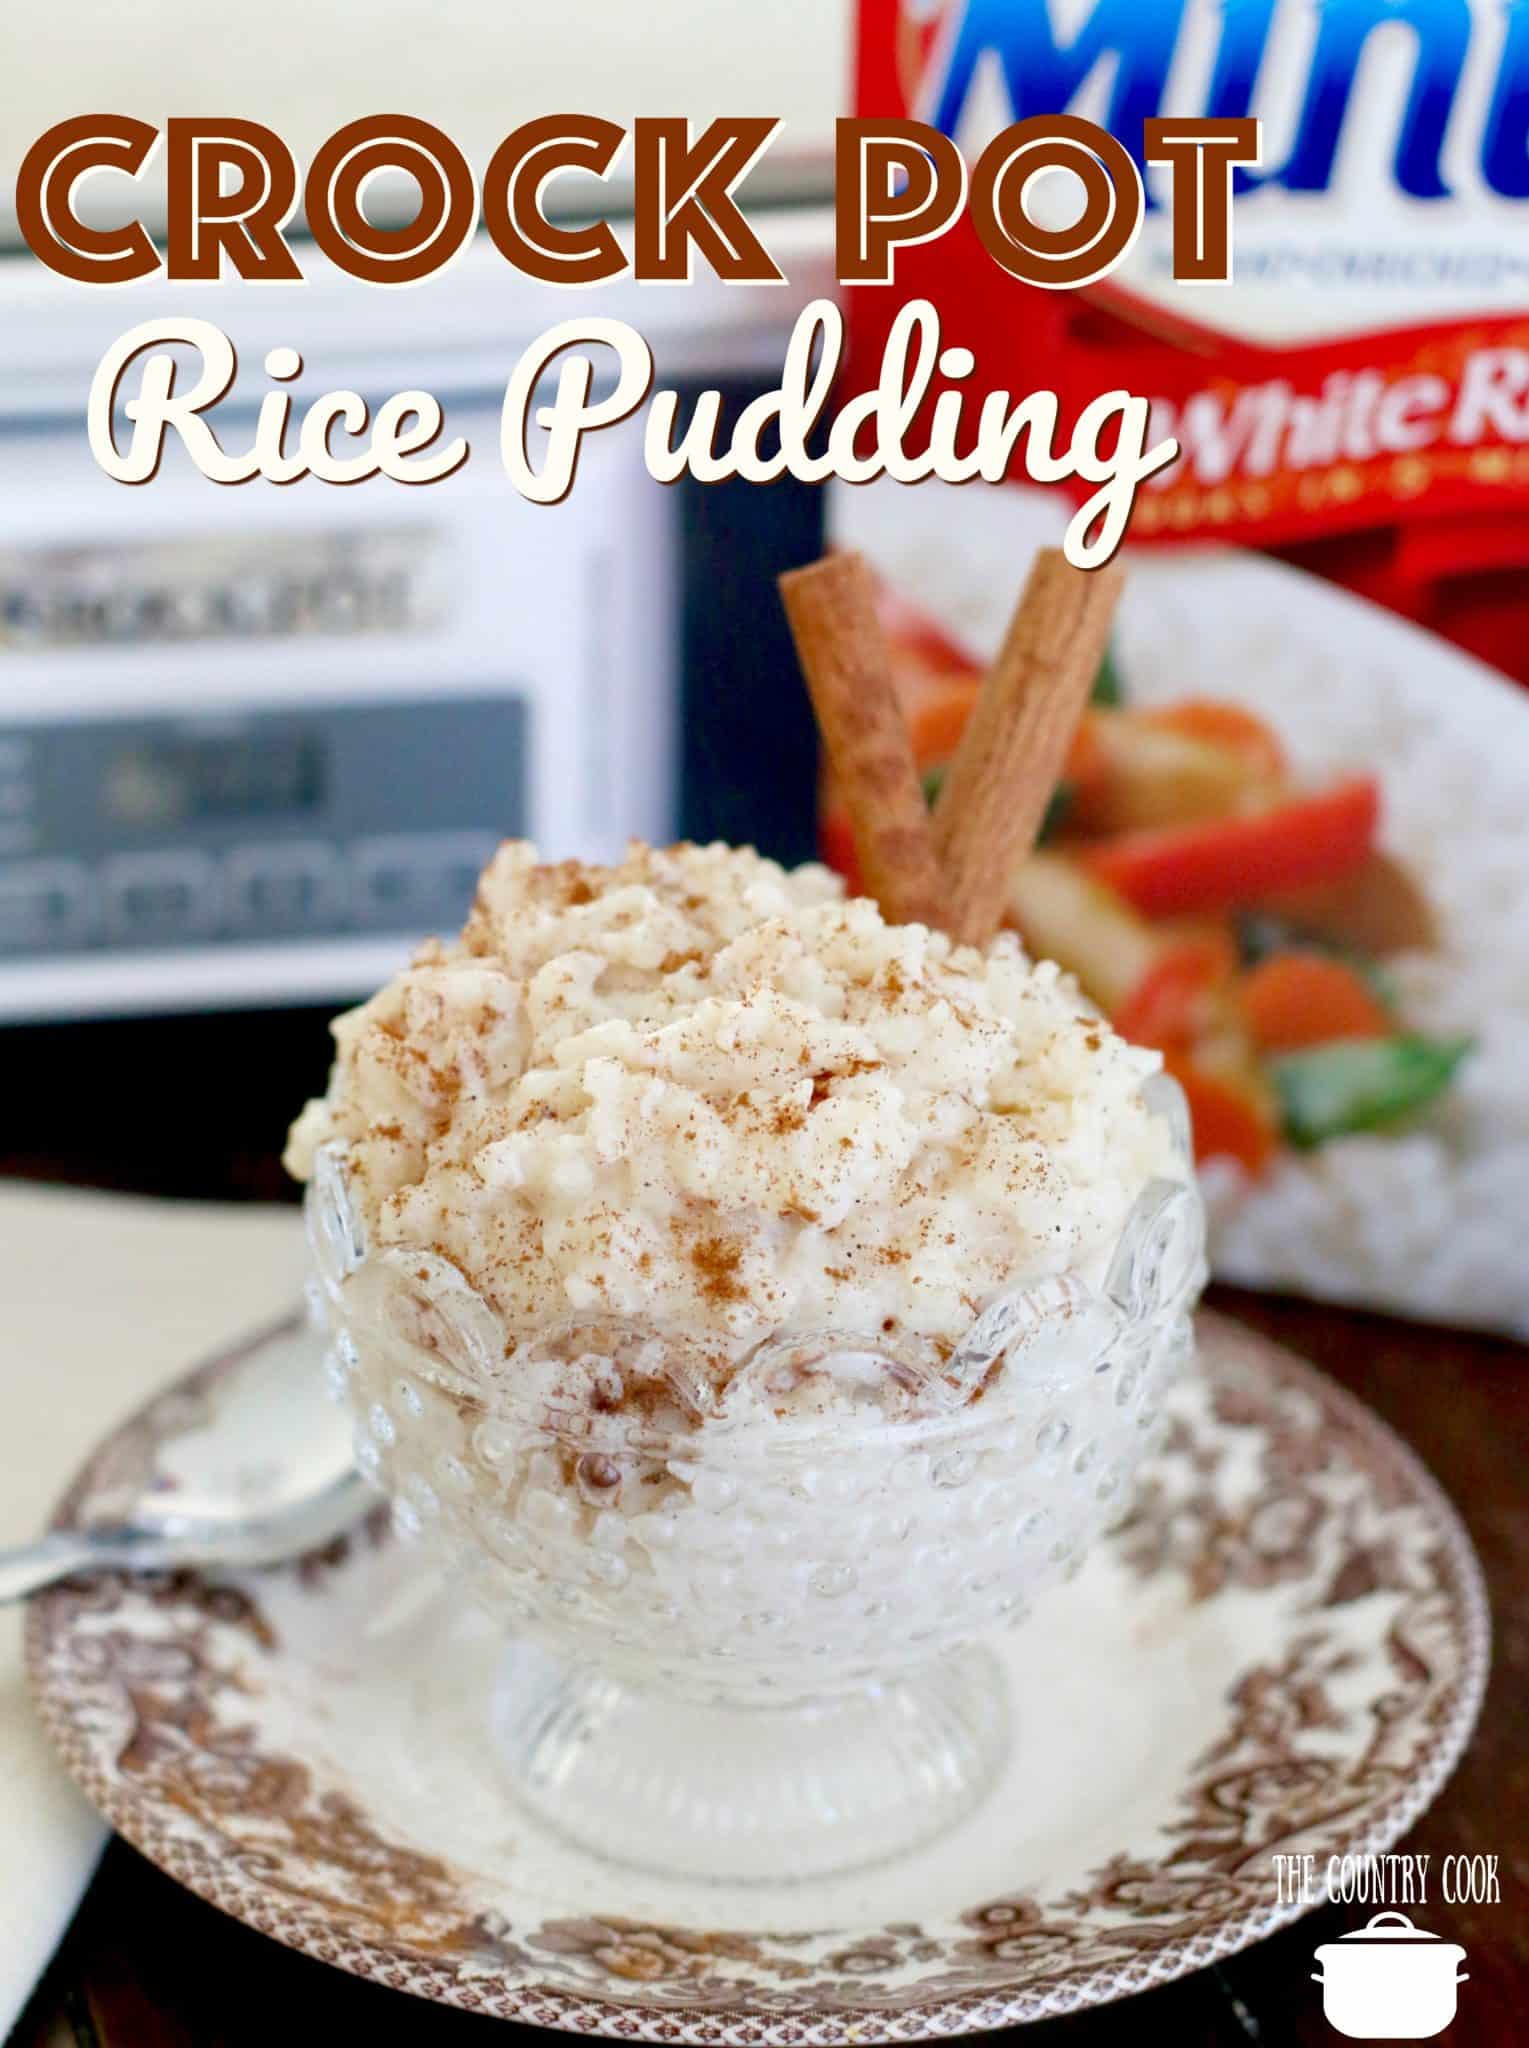 Crock Pot Rice Pudding served in clear glass serving dish by The Country Cook